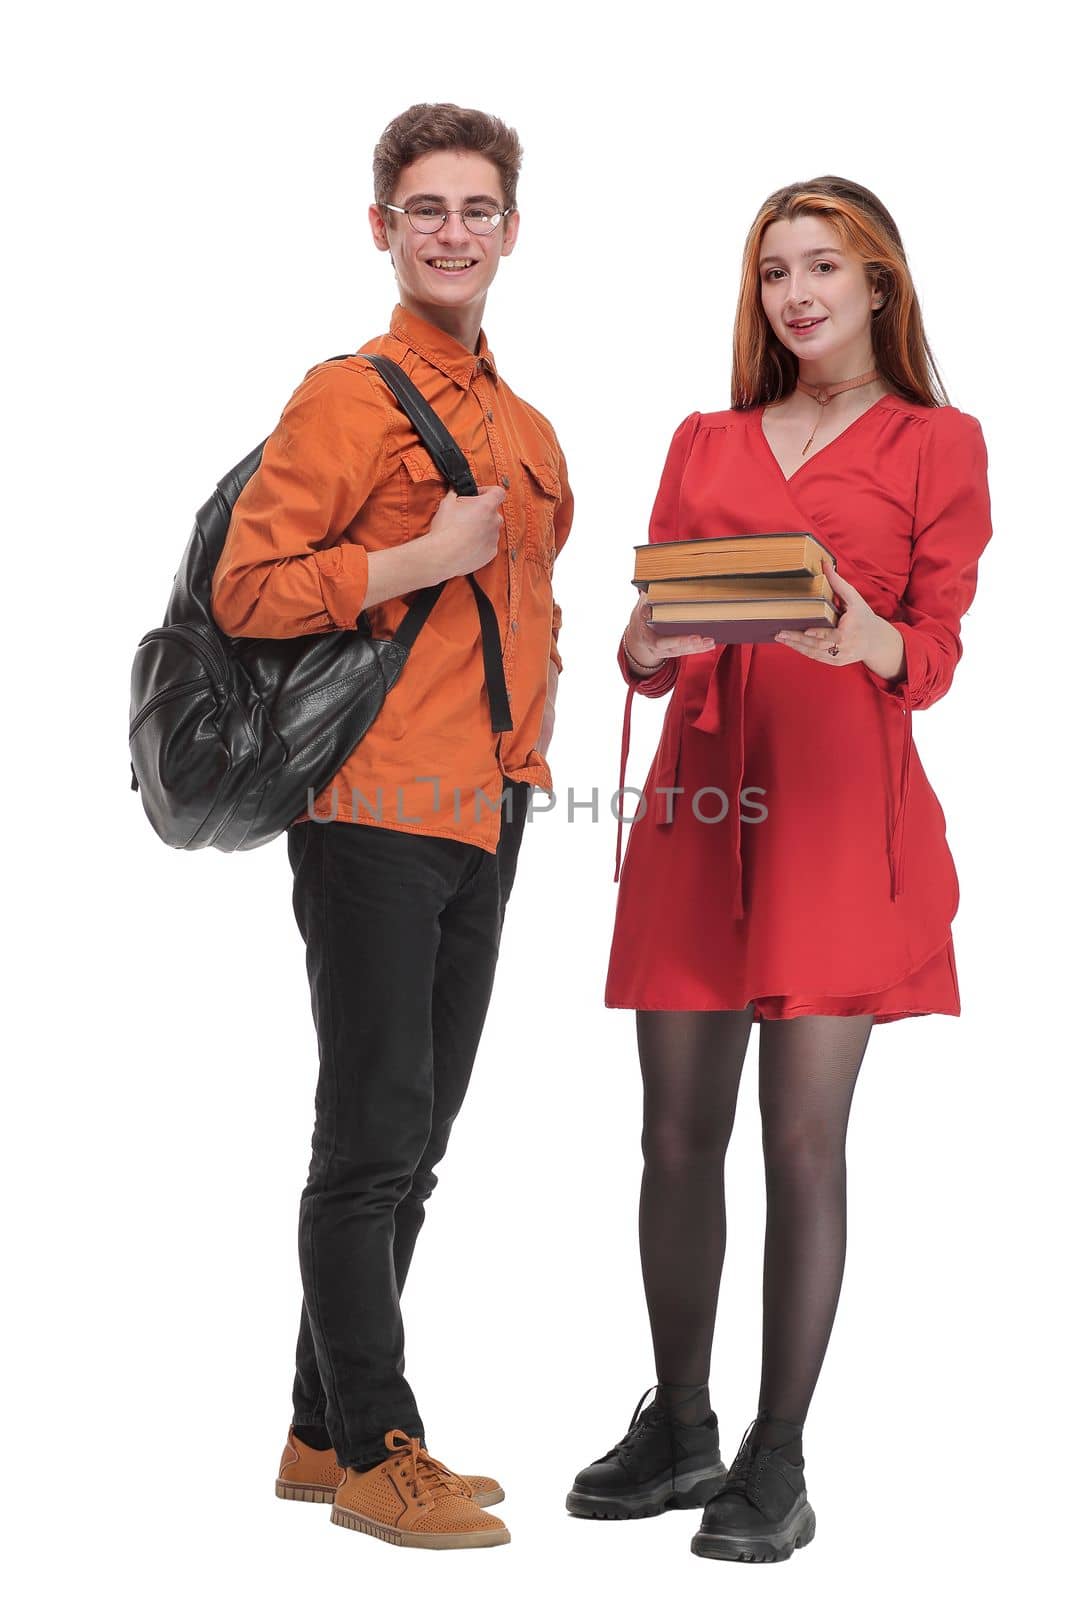 Young woman and man standing with books and bags, isolated on white background